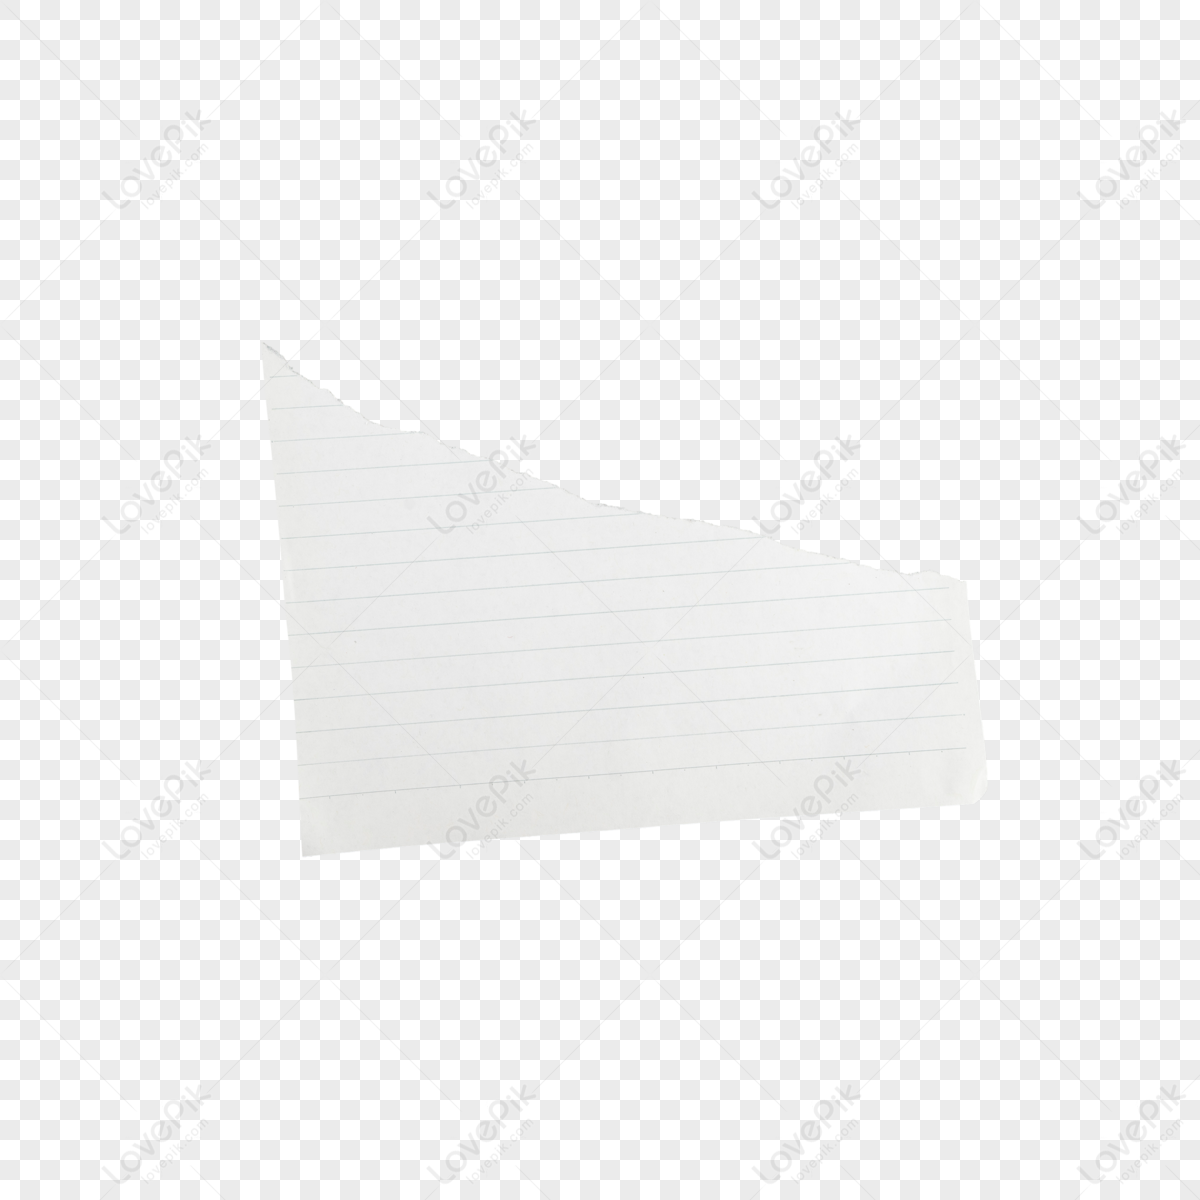 Premium Vector  Pale of white paper on transparent background.